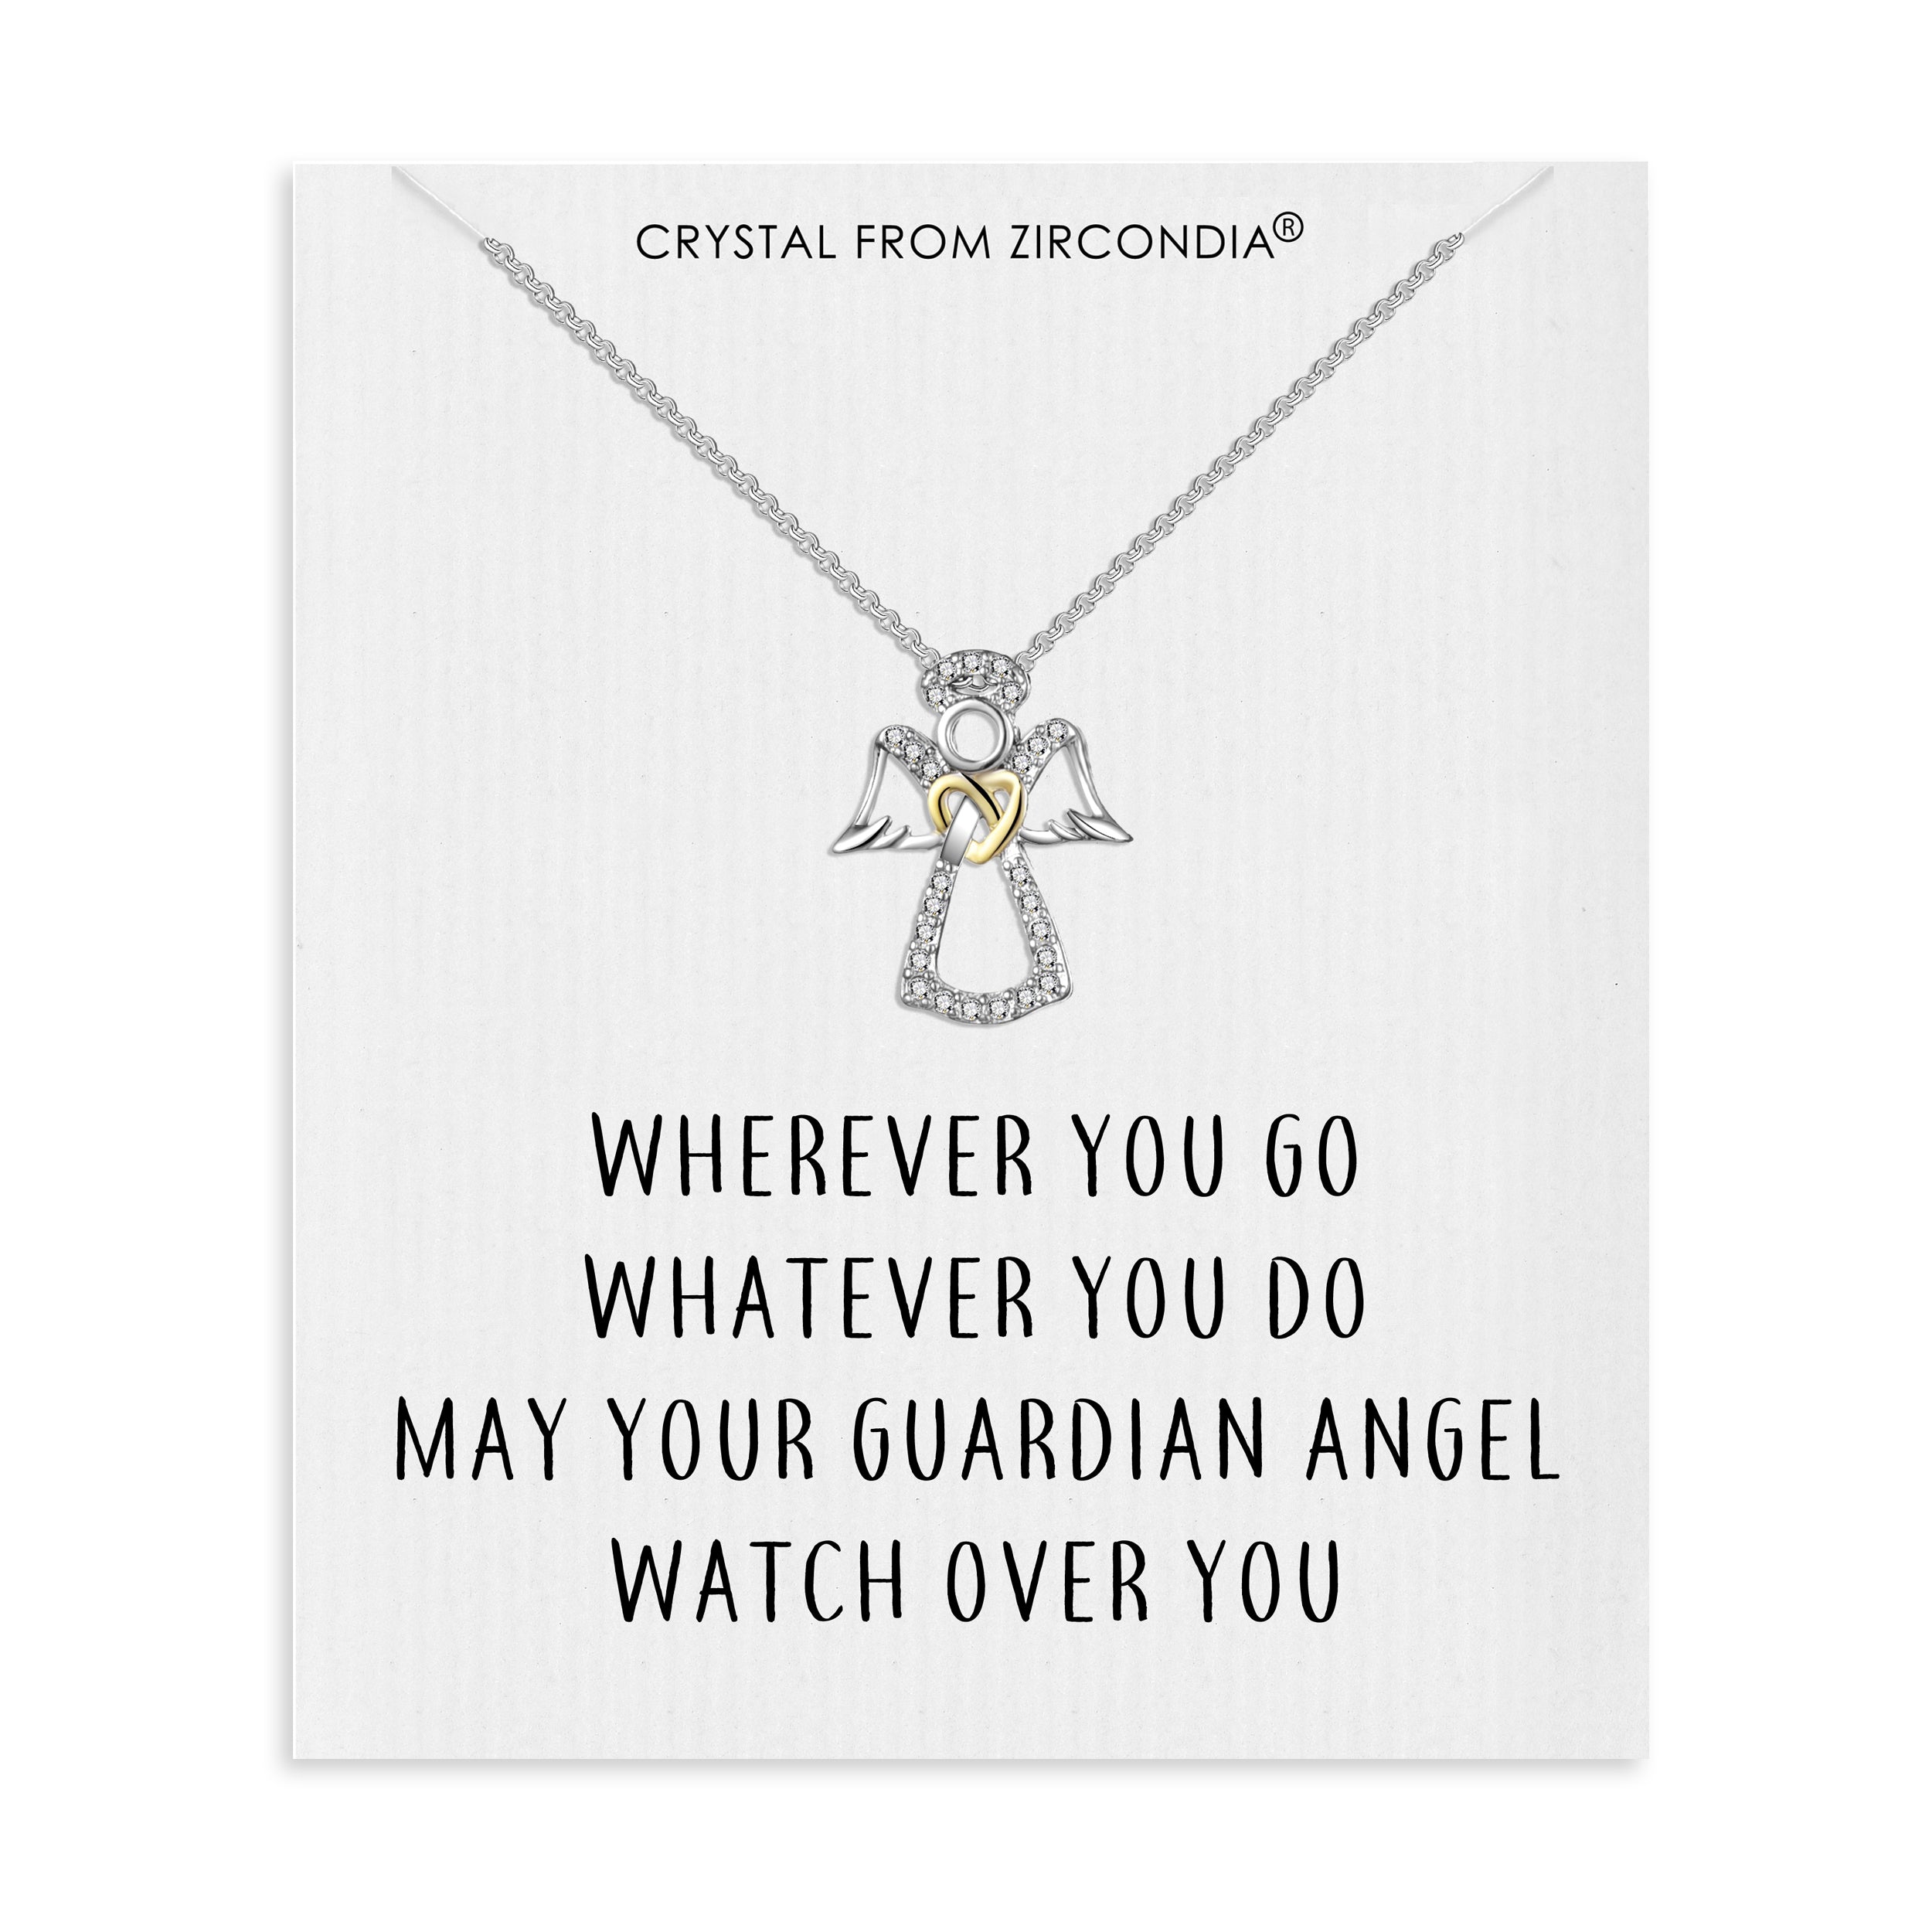 Guardian Angel Necklace with Quote Card Created with Zircondia® Crystals by Philip Jones Jewellery